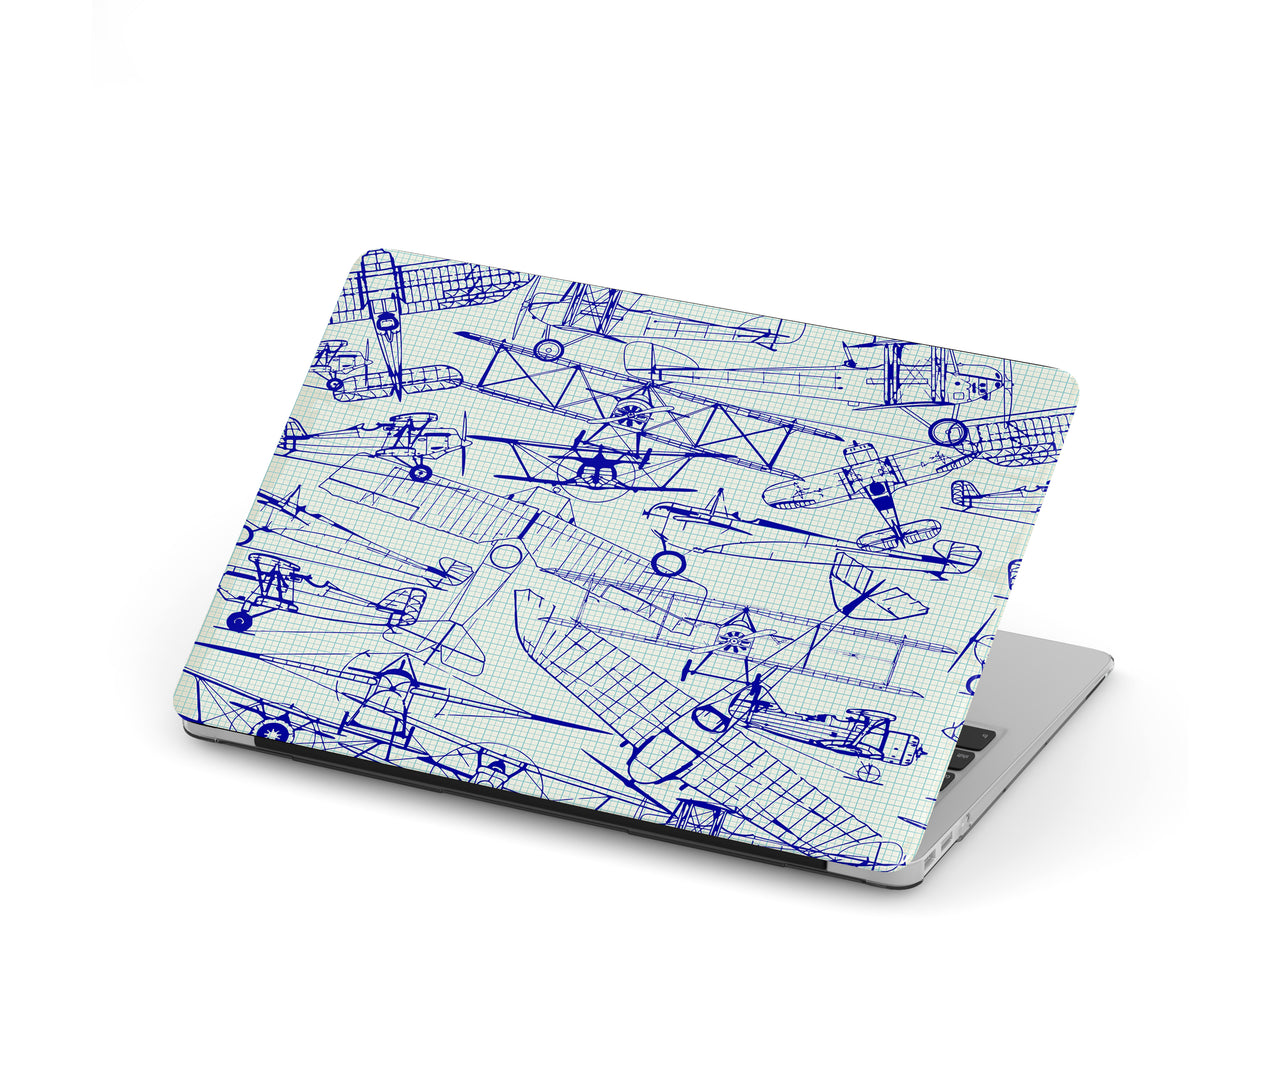 Amazing Drawings of Old Aircrafts Designed Macbook Cases